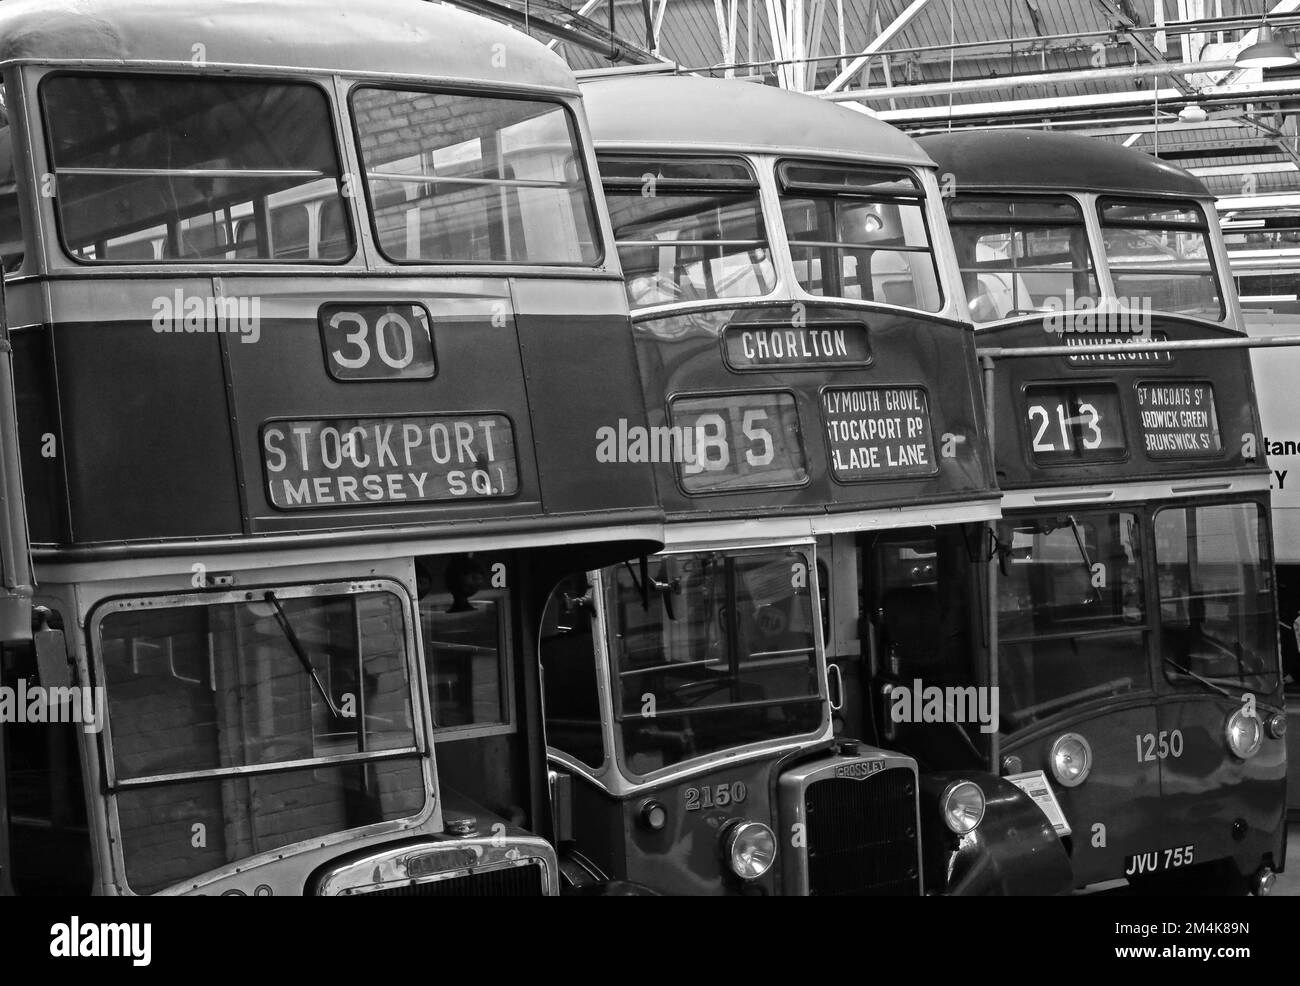 Manchester historic buses in Queens Road depot, Stockport 30, Chorlton 85, University 213, 1951 Crossley Dominion Trolley Bus JVU755 Stock Photo